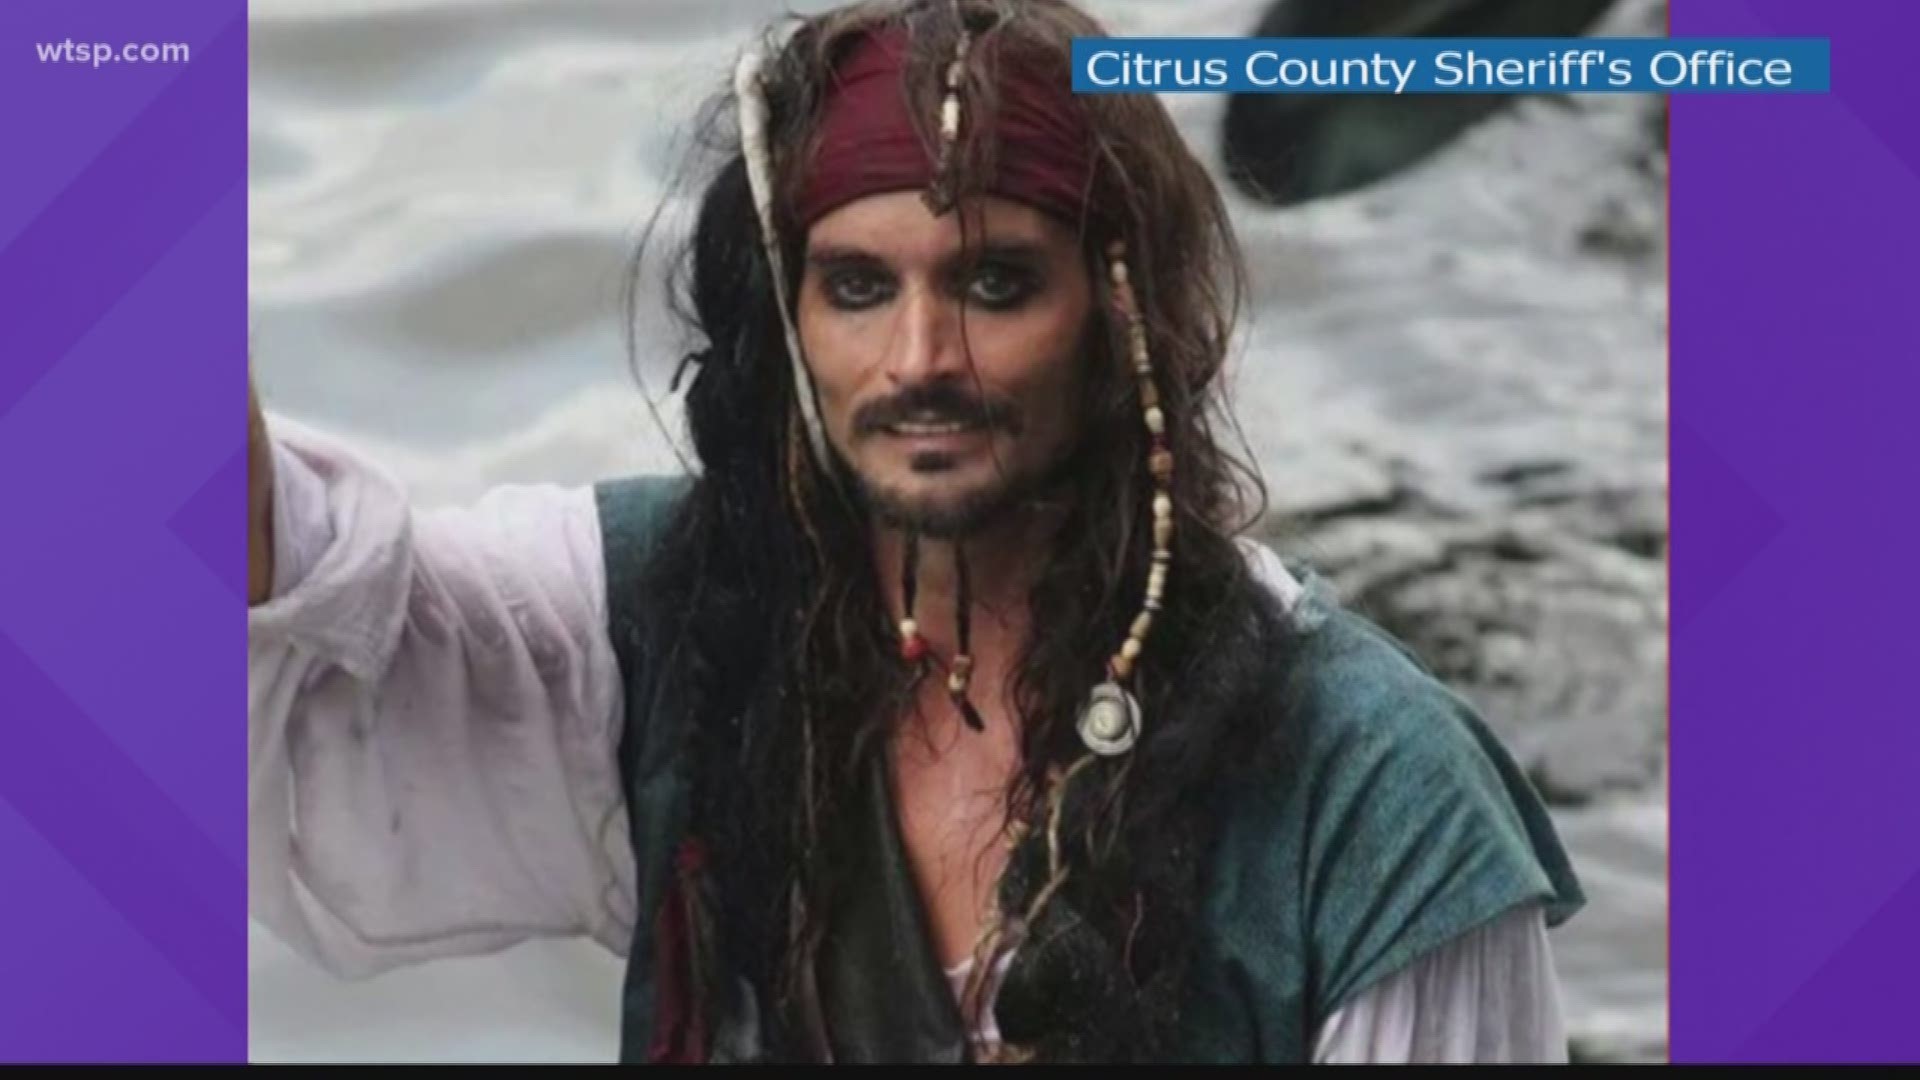 Joshua Hensley was known in the community for dressing up as "Captain Jack Sparrow" while paddleboarding. https://on.wtsp.com/2lQEzGr